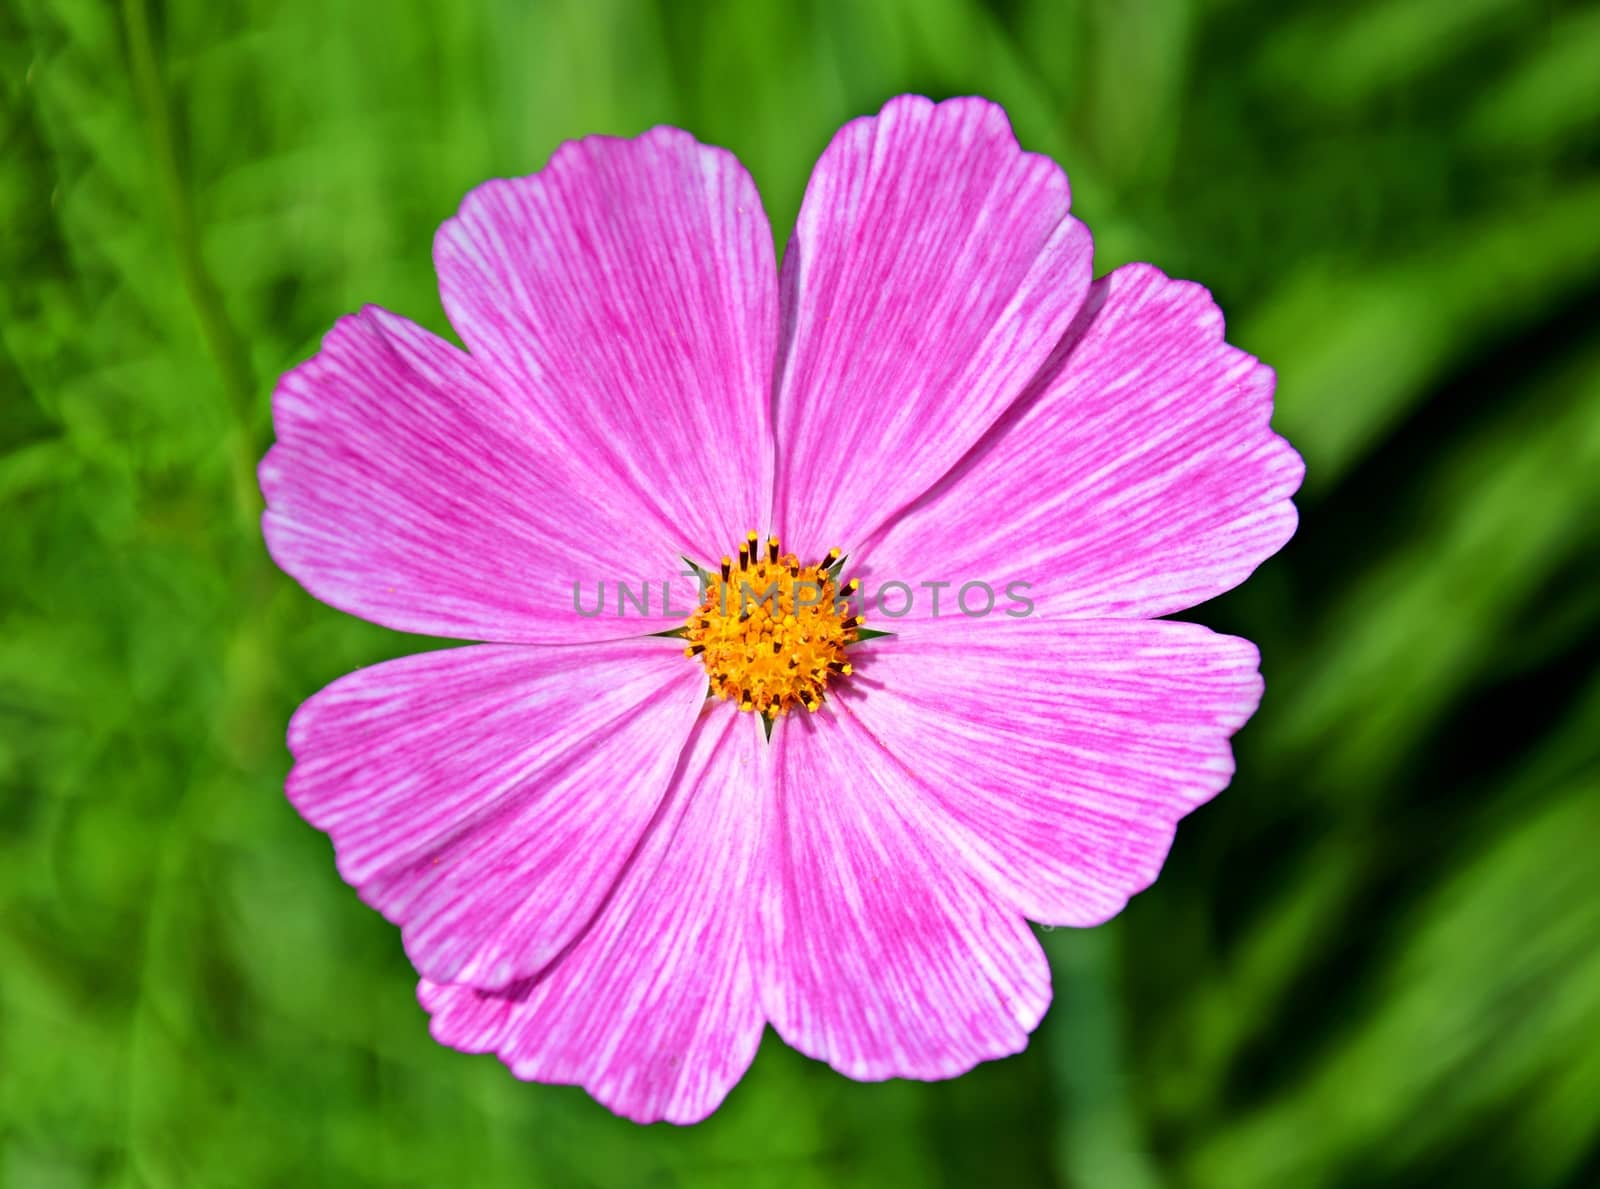 A pink cosmos or mexican aster (cosmos bipinnnatus) flower close up taken on a blurry green background.